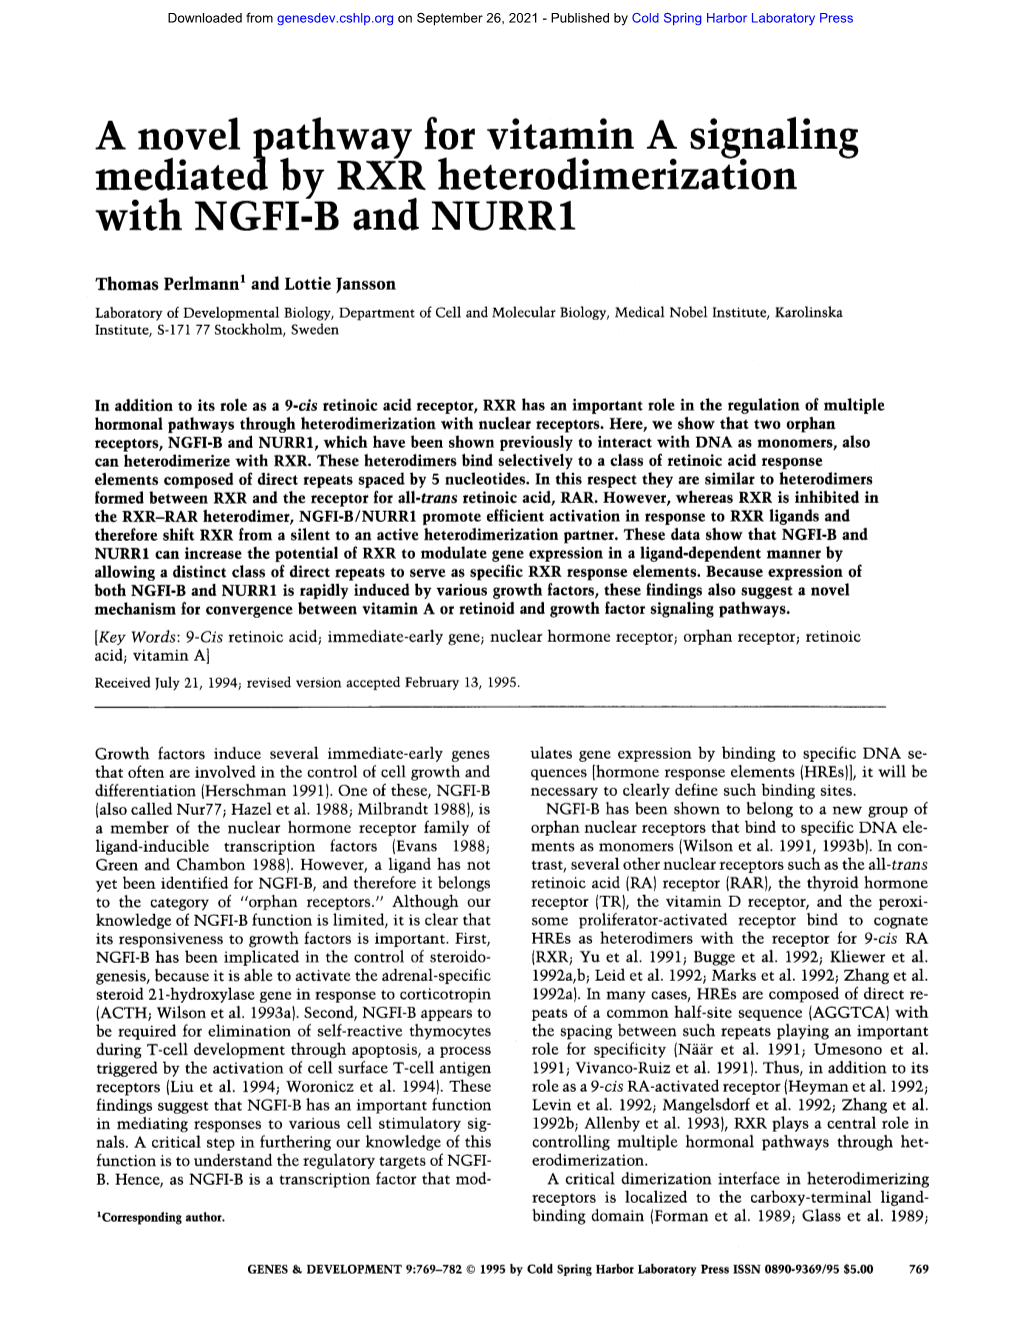 A Novel Pathway for Vitamin a Signaling Mediated by RXR Heterodimerization with NGFI-B and NURR1